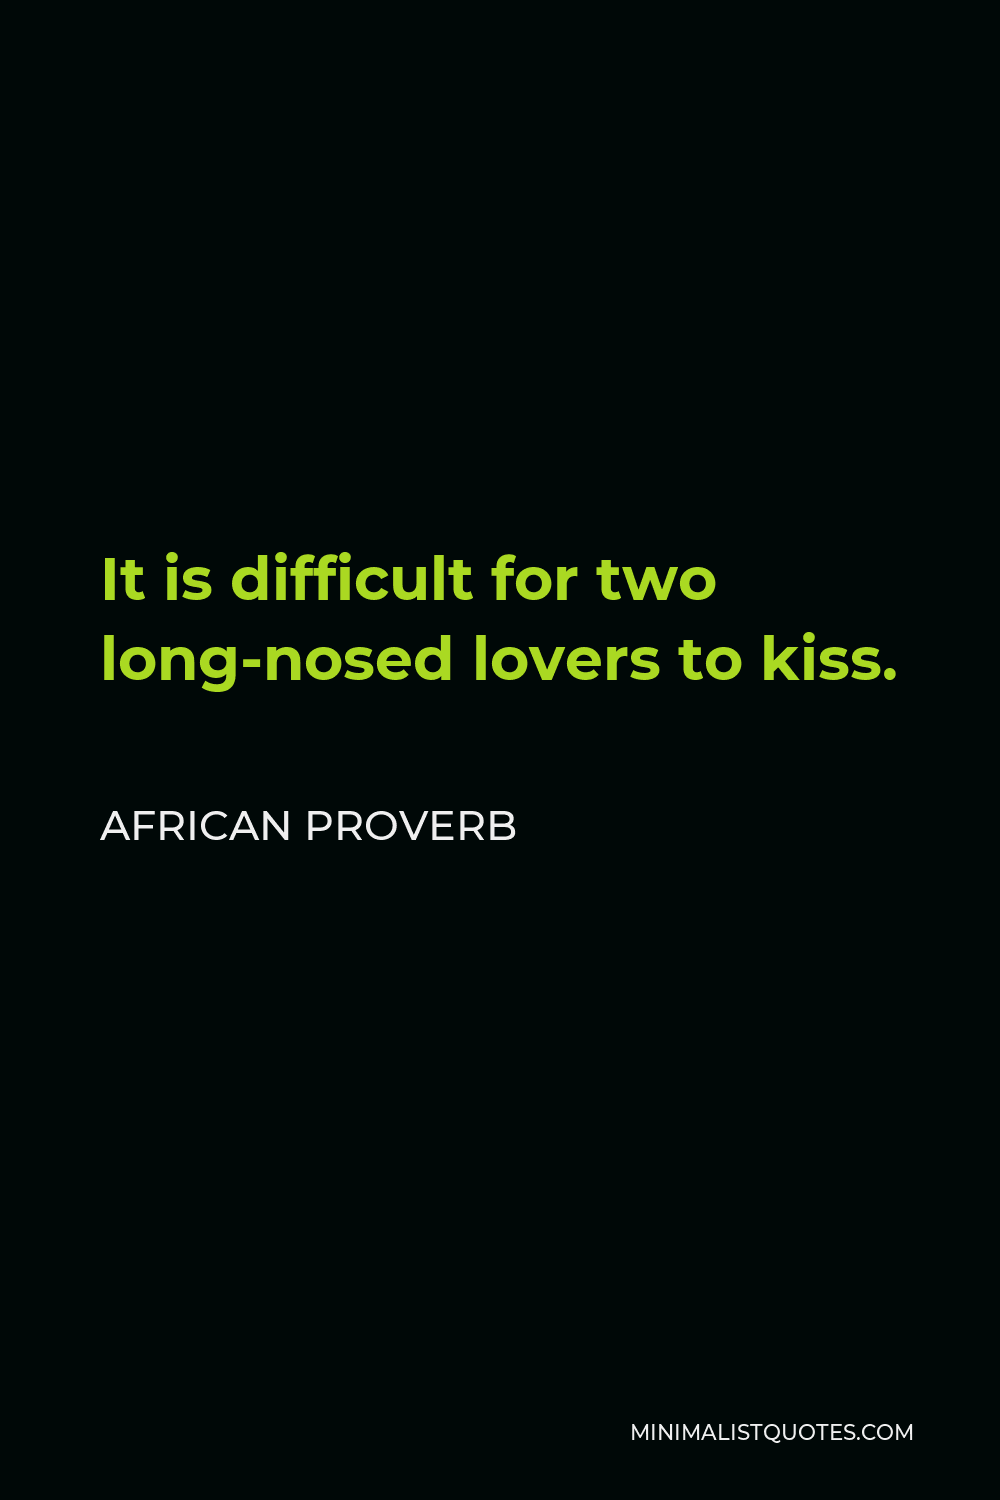 African Proverb Quote - It is difficult for two long-nosed lovers to kiss.